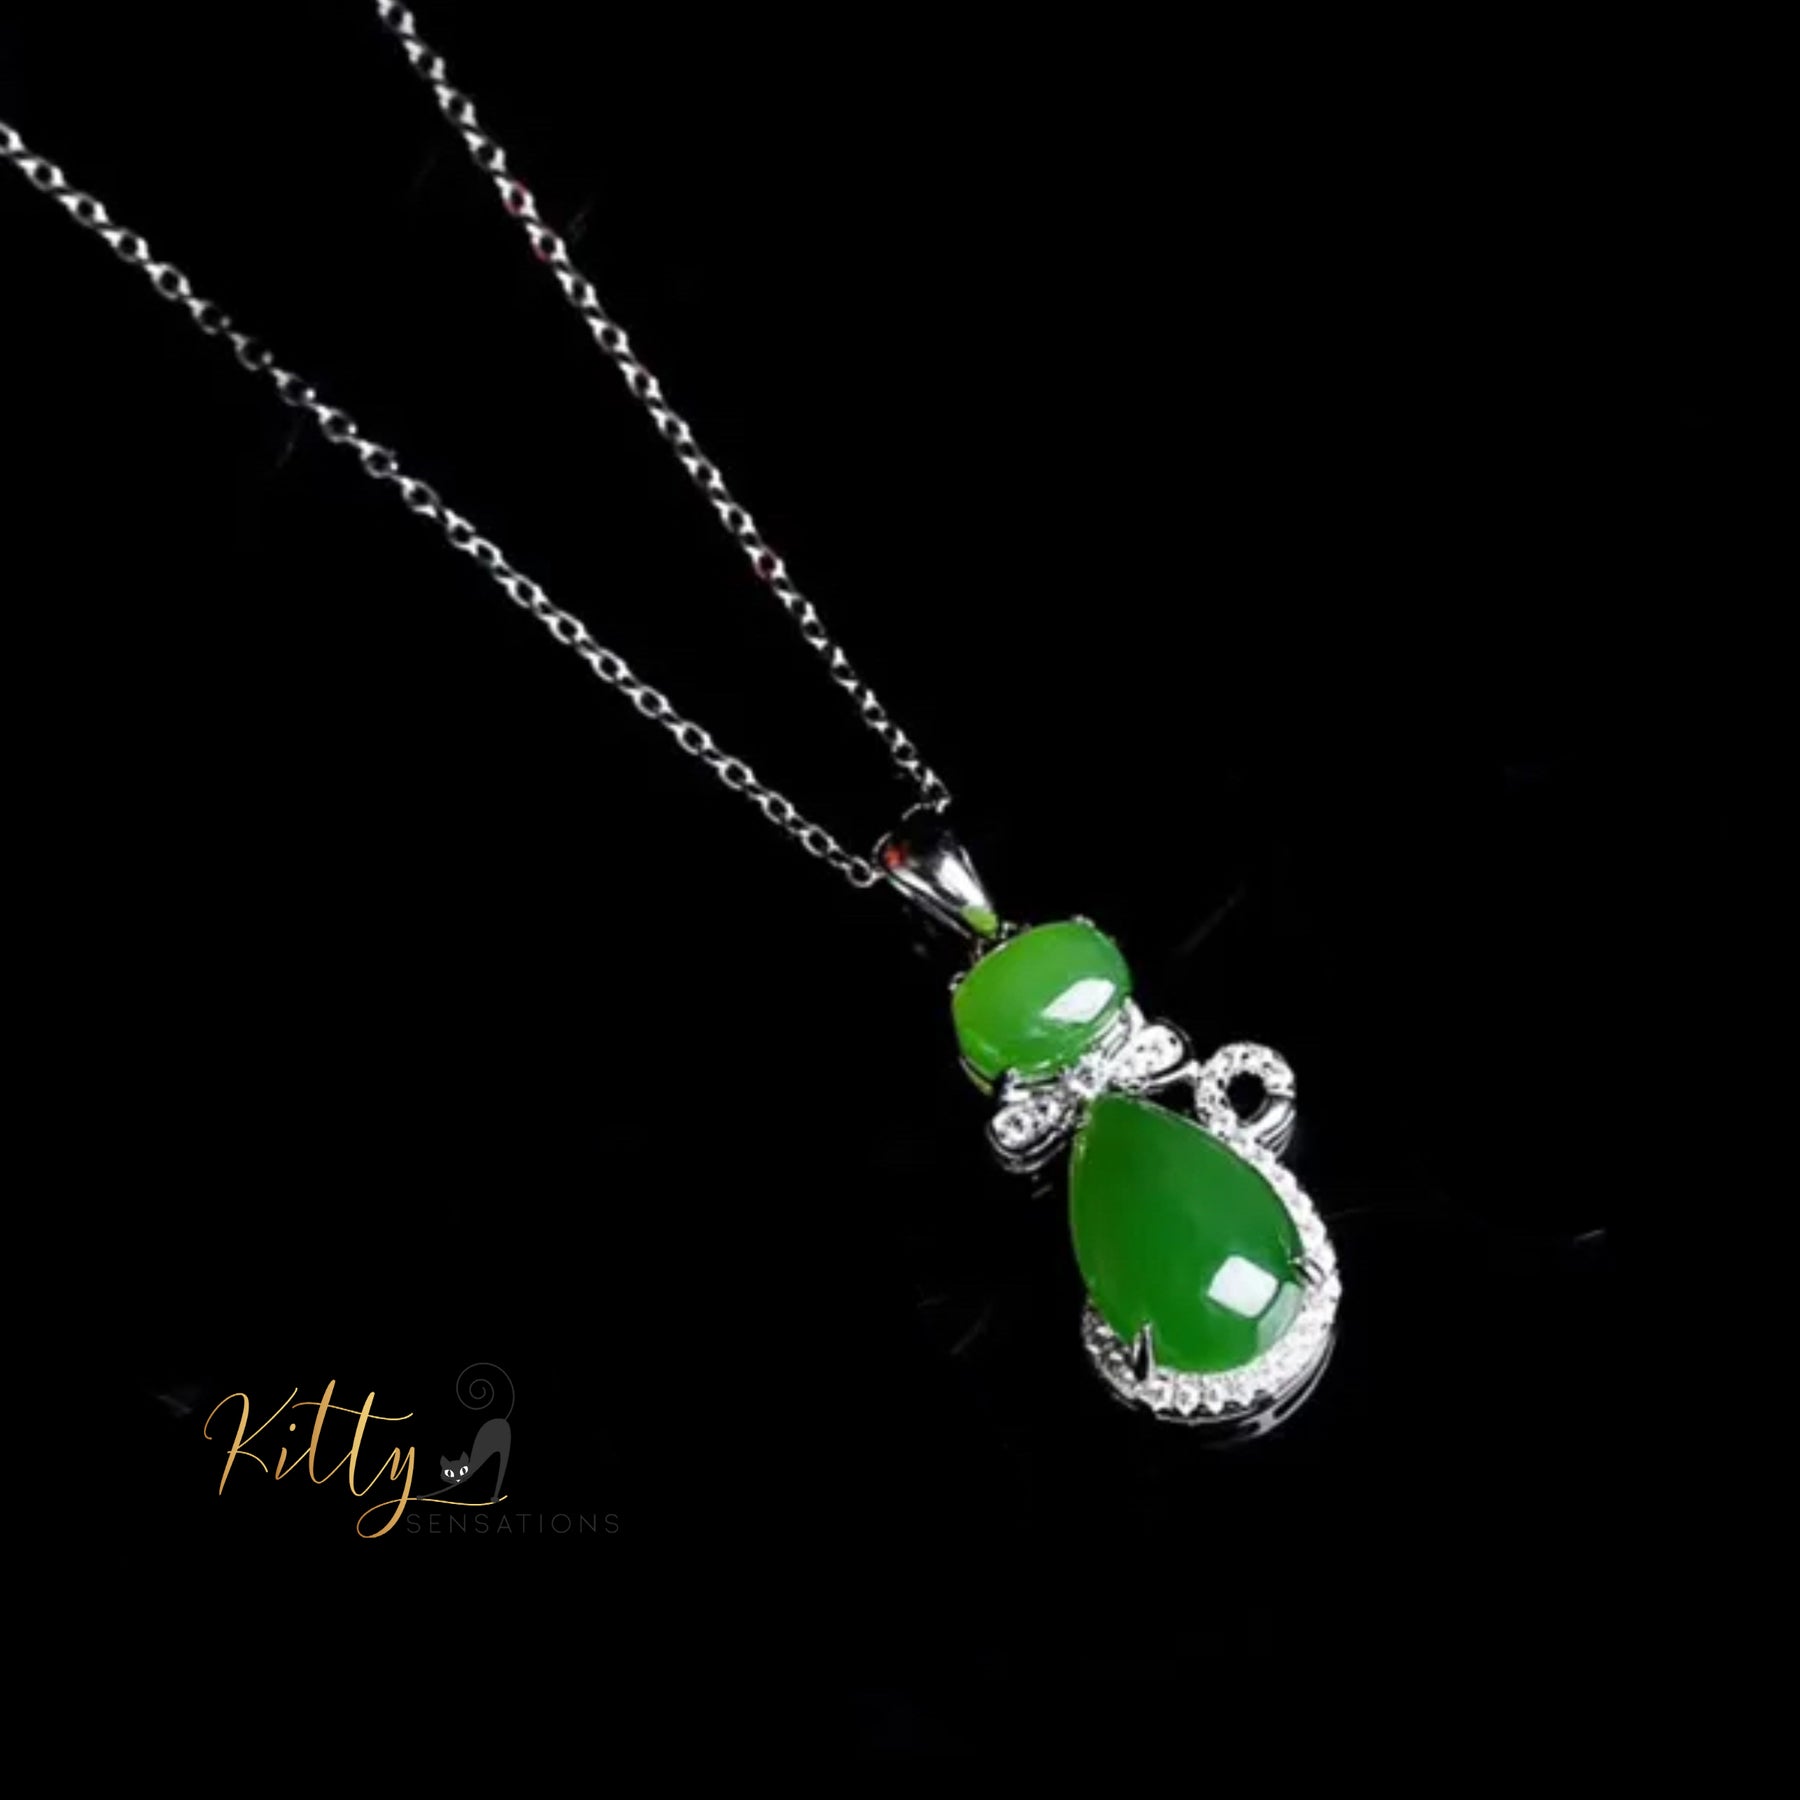 http://KittySensations.com: Natural Chrysoprase Cat Necklace in Solid 925 Sterling Silver ($103.88): https://kittysensations.com/products/natural-chrysoprase-cat-necklace-in-solid-925-sterling-silver?_pos=1&_psq=chrysopr&_ss=e&_v=1.0